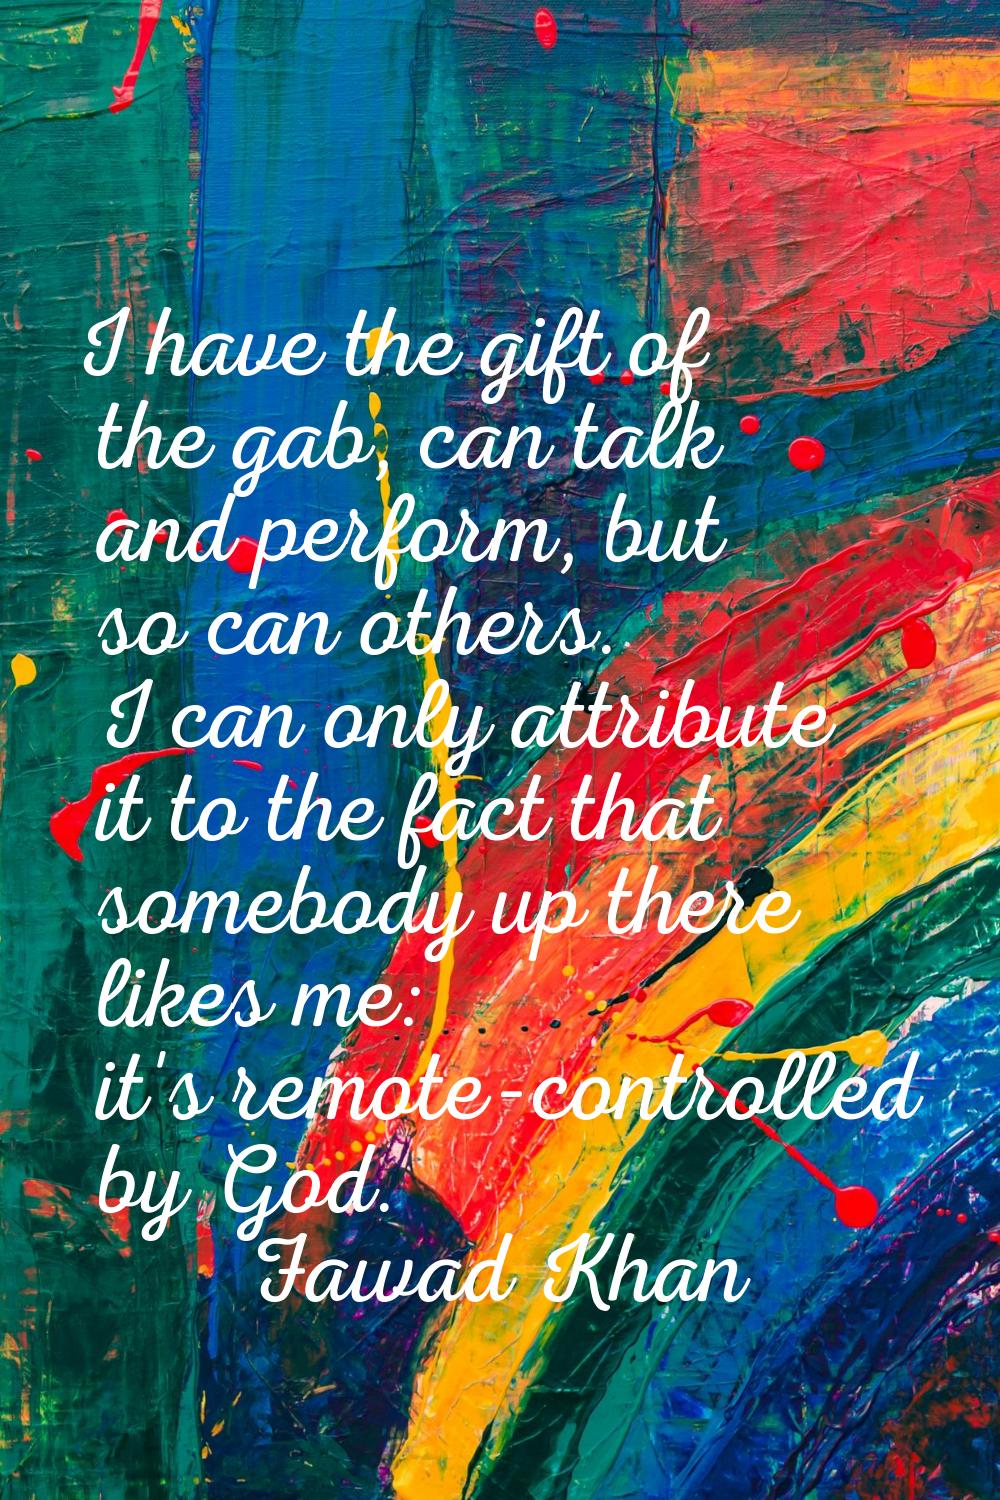 I have the gift of the gab, can talk and perform, but so can others. I can only attribute it to the